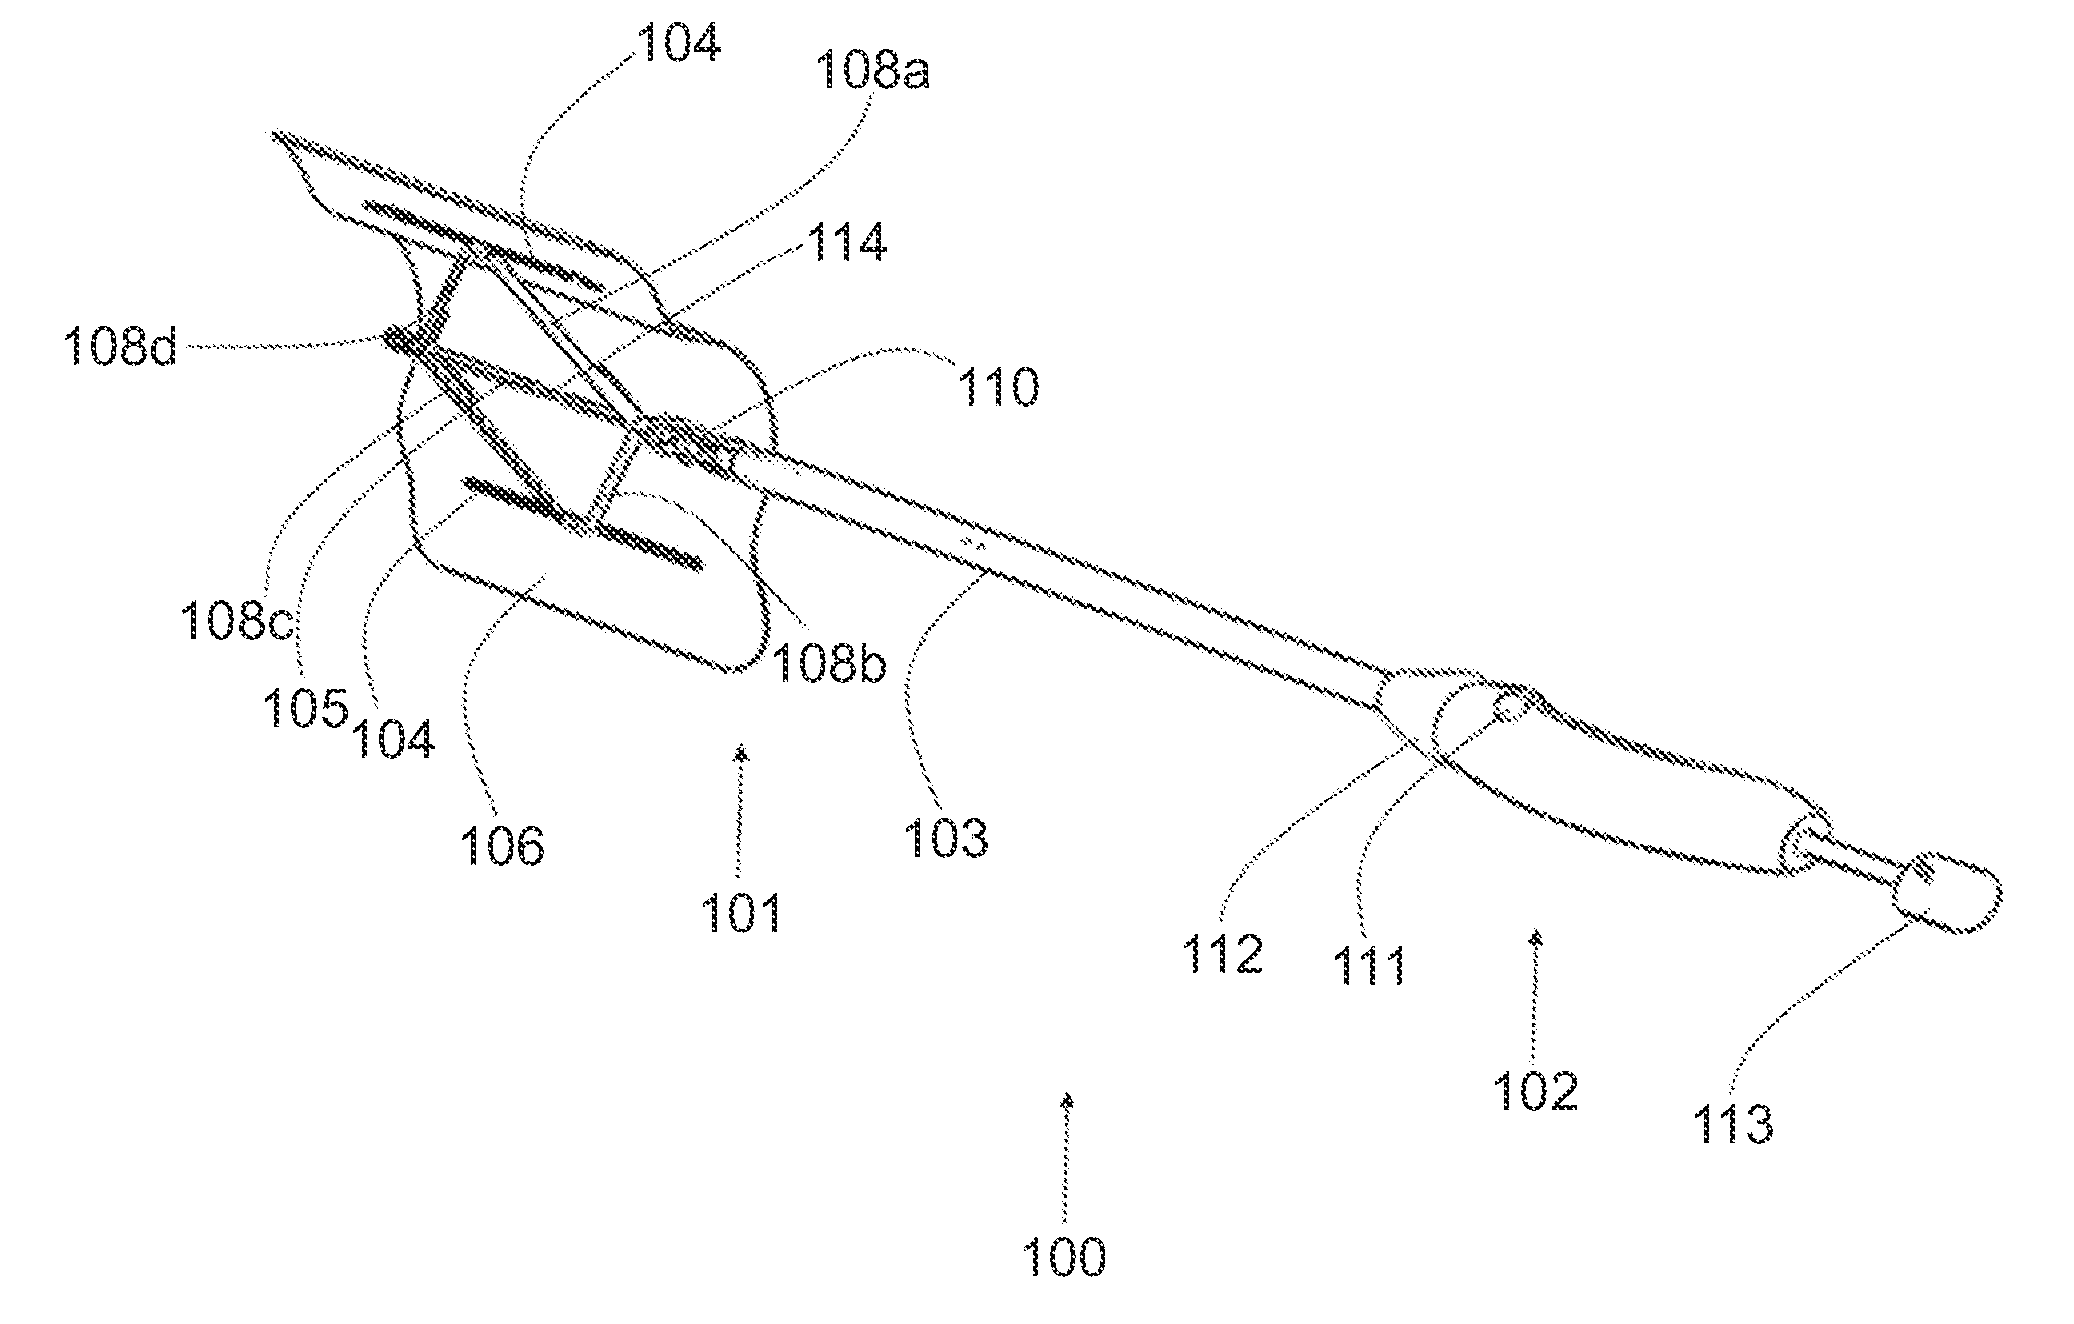 Articulating patch deployment device and method of use